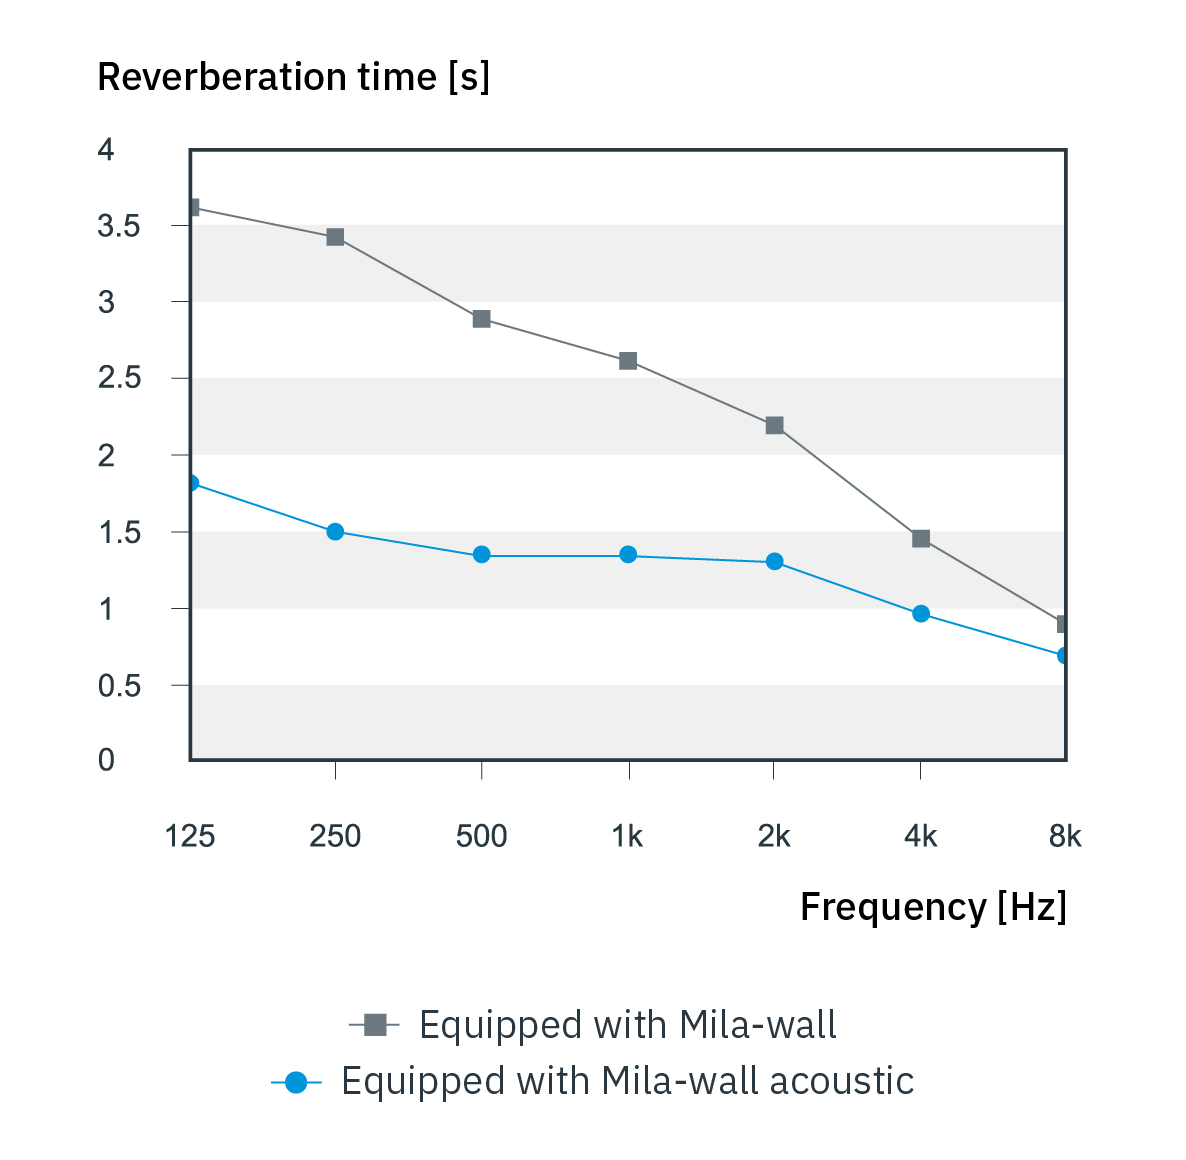 Reverberation time diagram when using Mila-wall and Mila-wall Acoustic